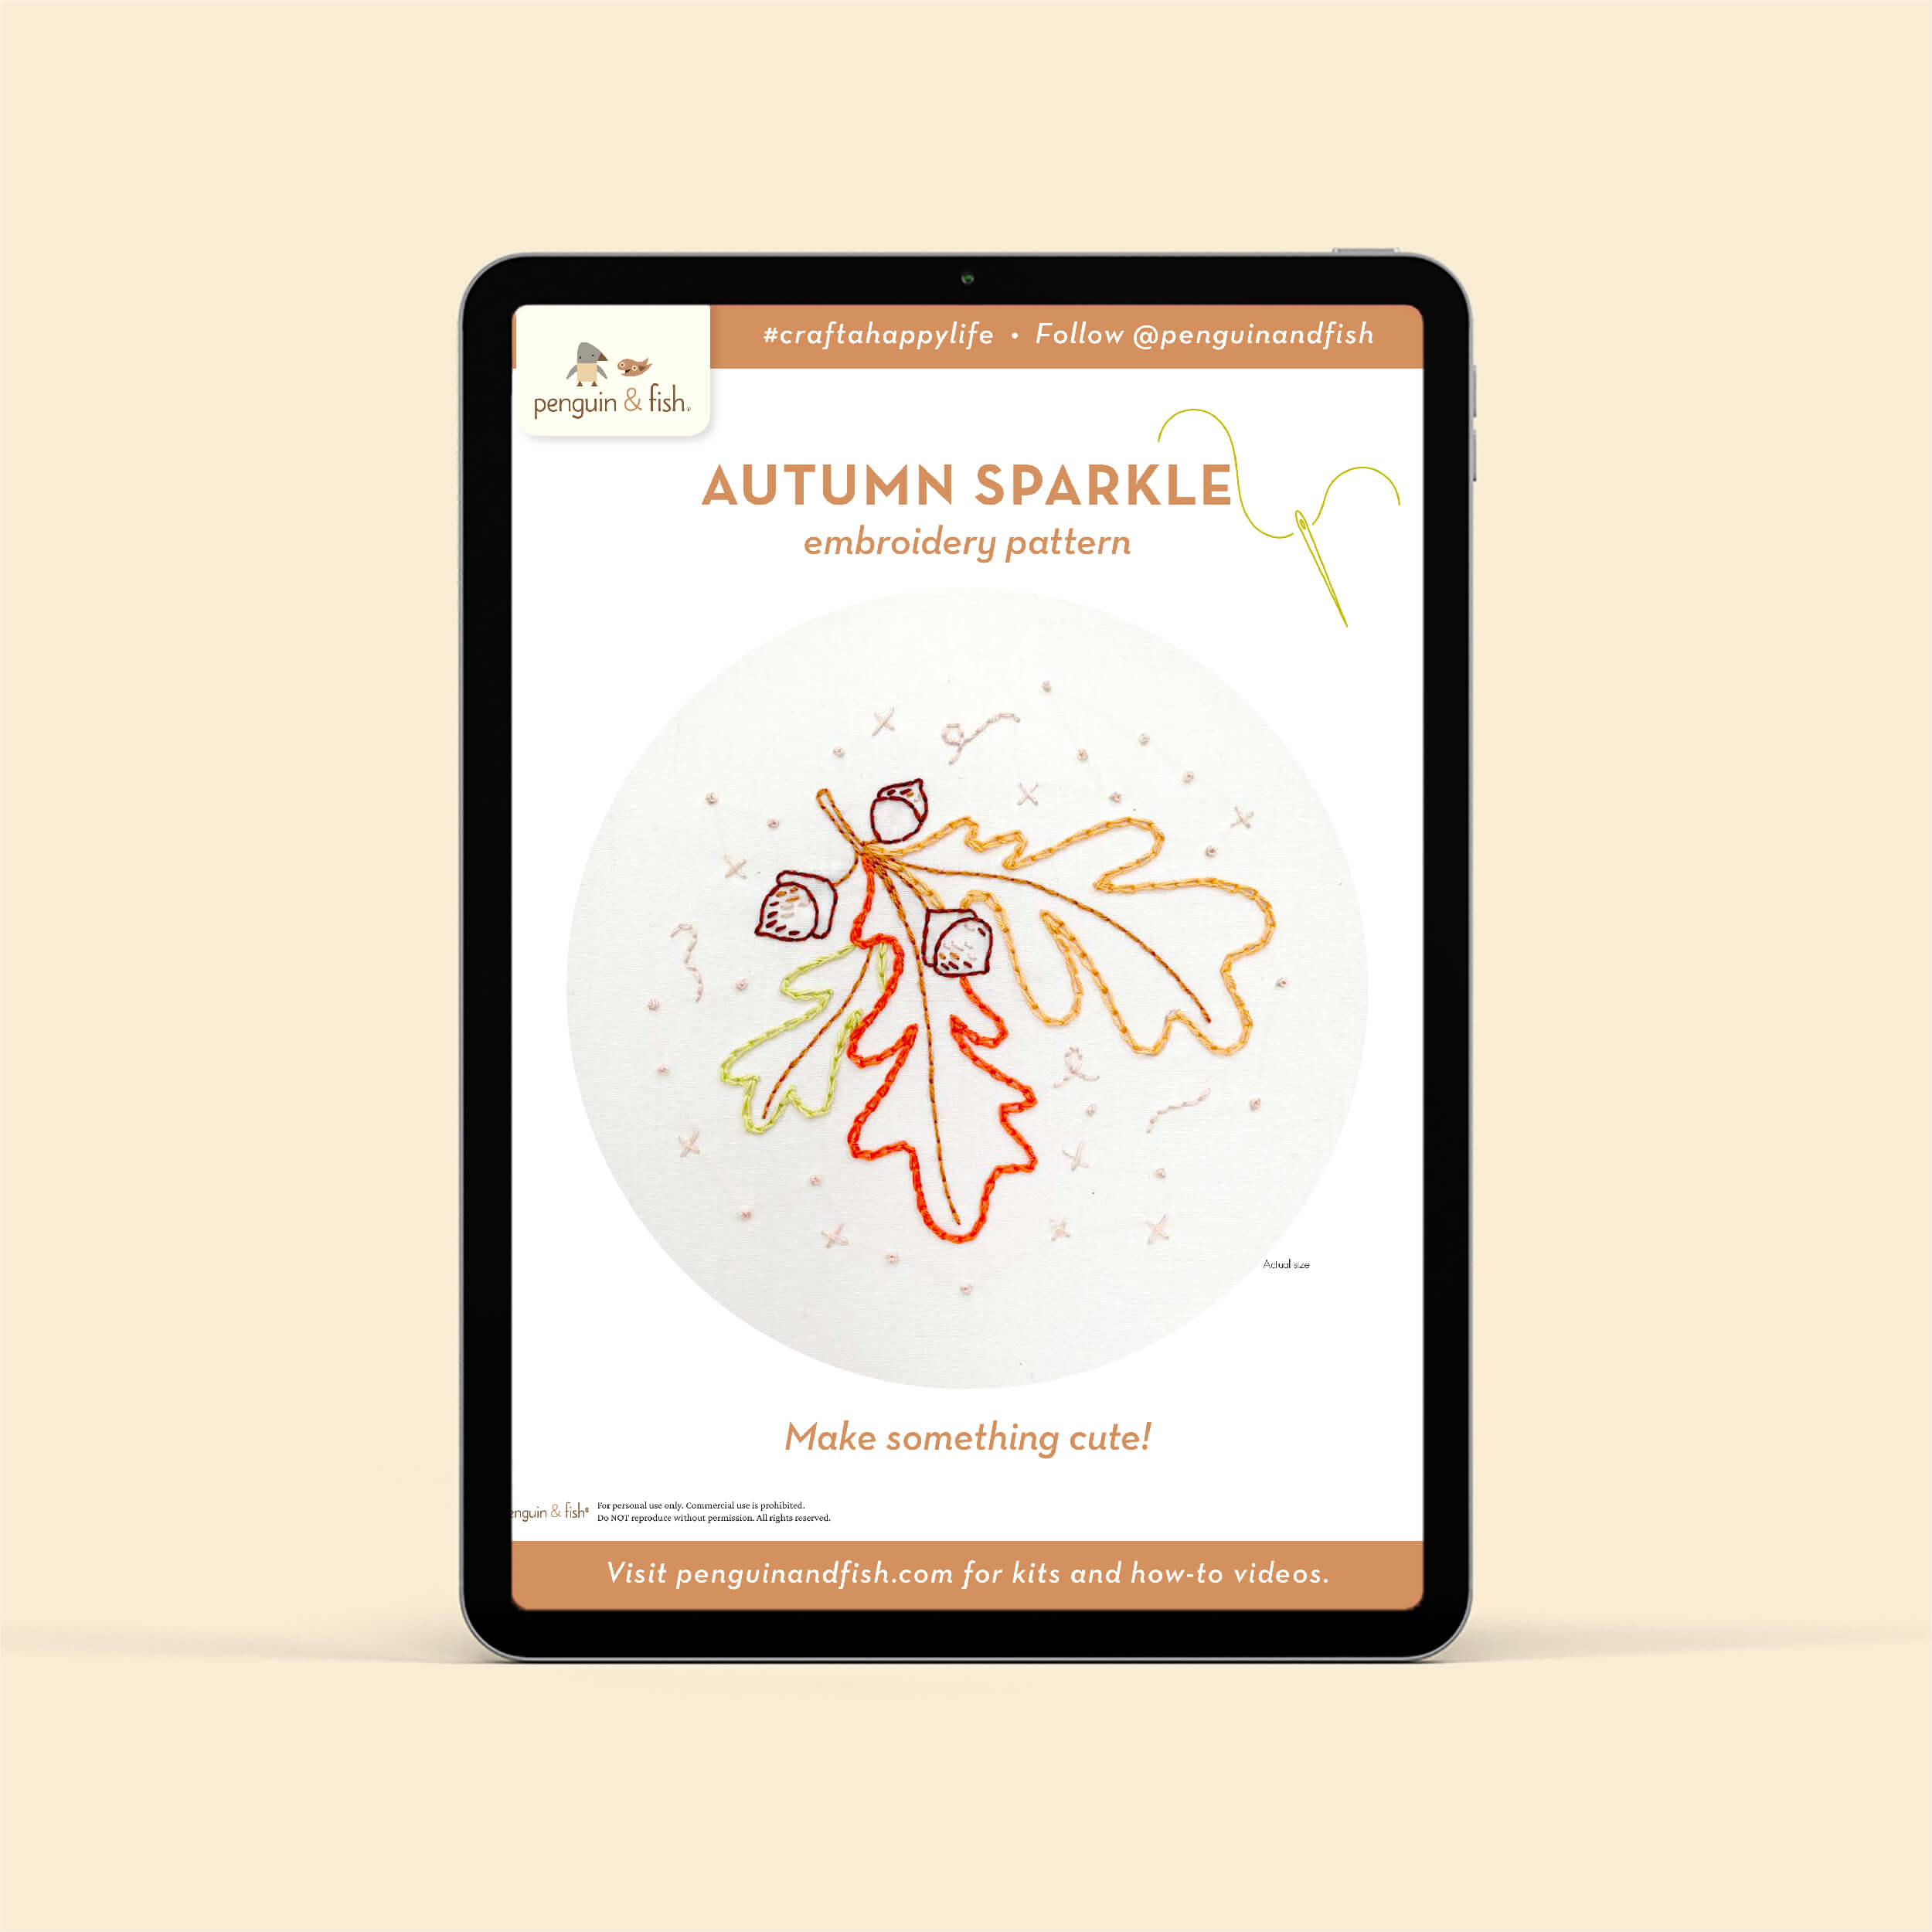 Autumn Sparkle PDF embroidery pattern shown on a tablet